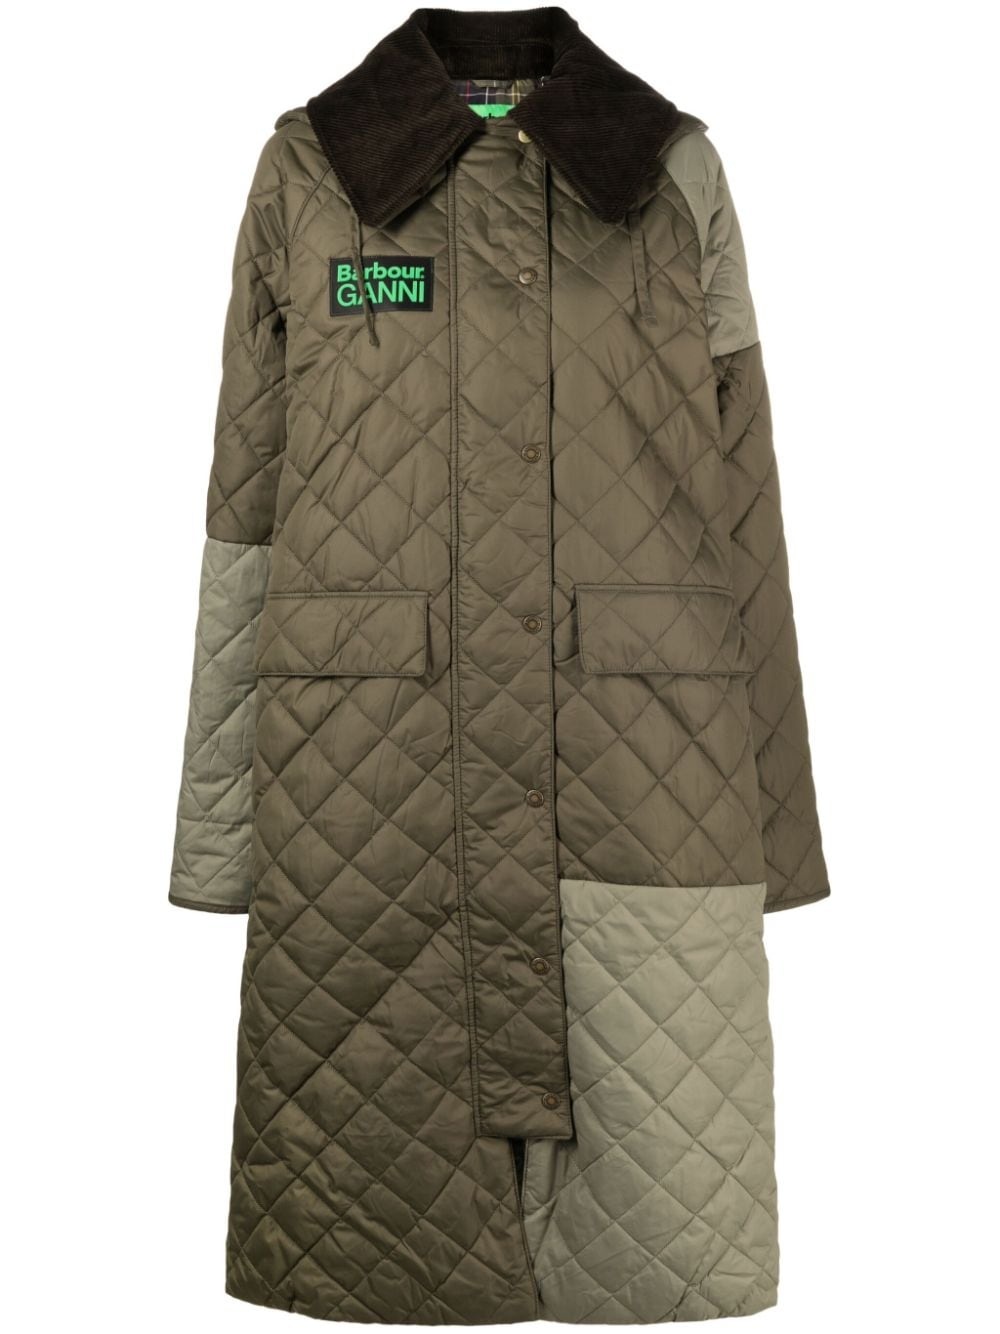 Barbour x GANNI Burghley quilted coat | REVERSIBLE